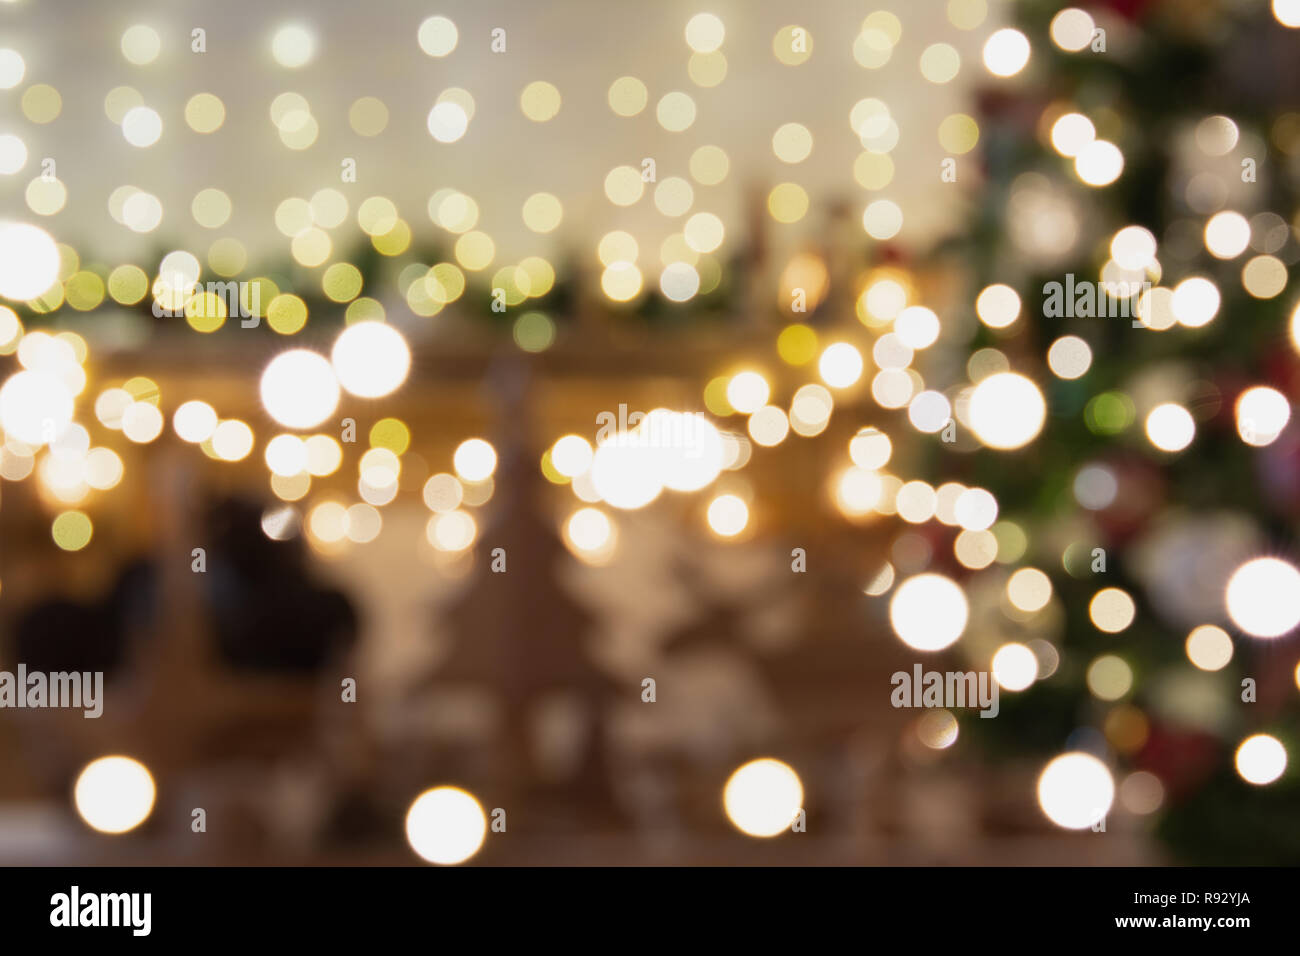 Abstract composition. Beautiful blurred Christmas interior with fireplace, wood mantelpiece, lit up Christmas tree, warm yellow and colorful lights, candles, toned Stock Photo